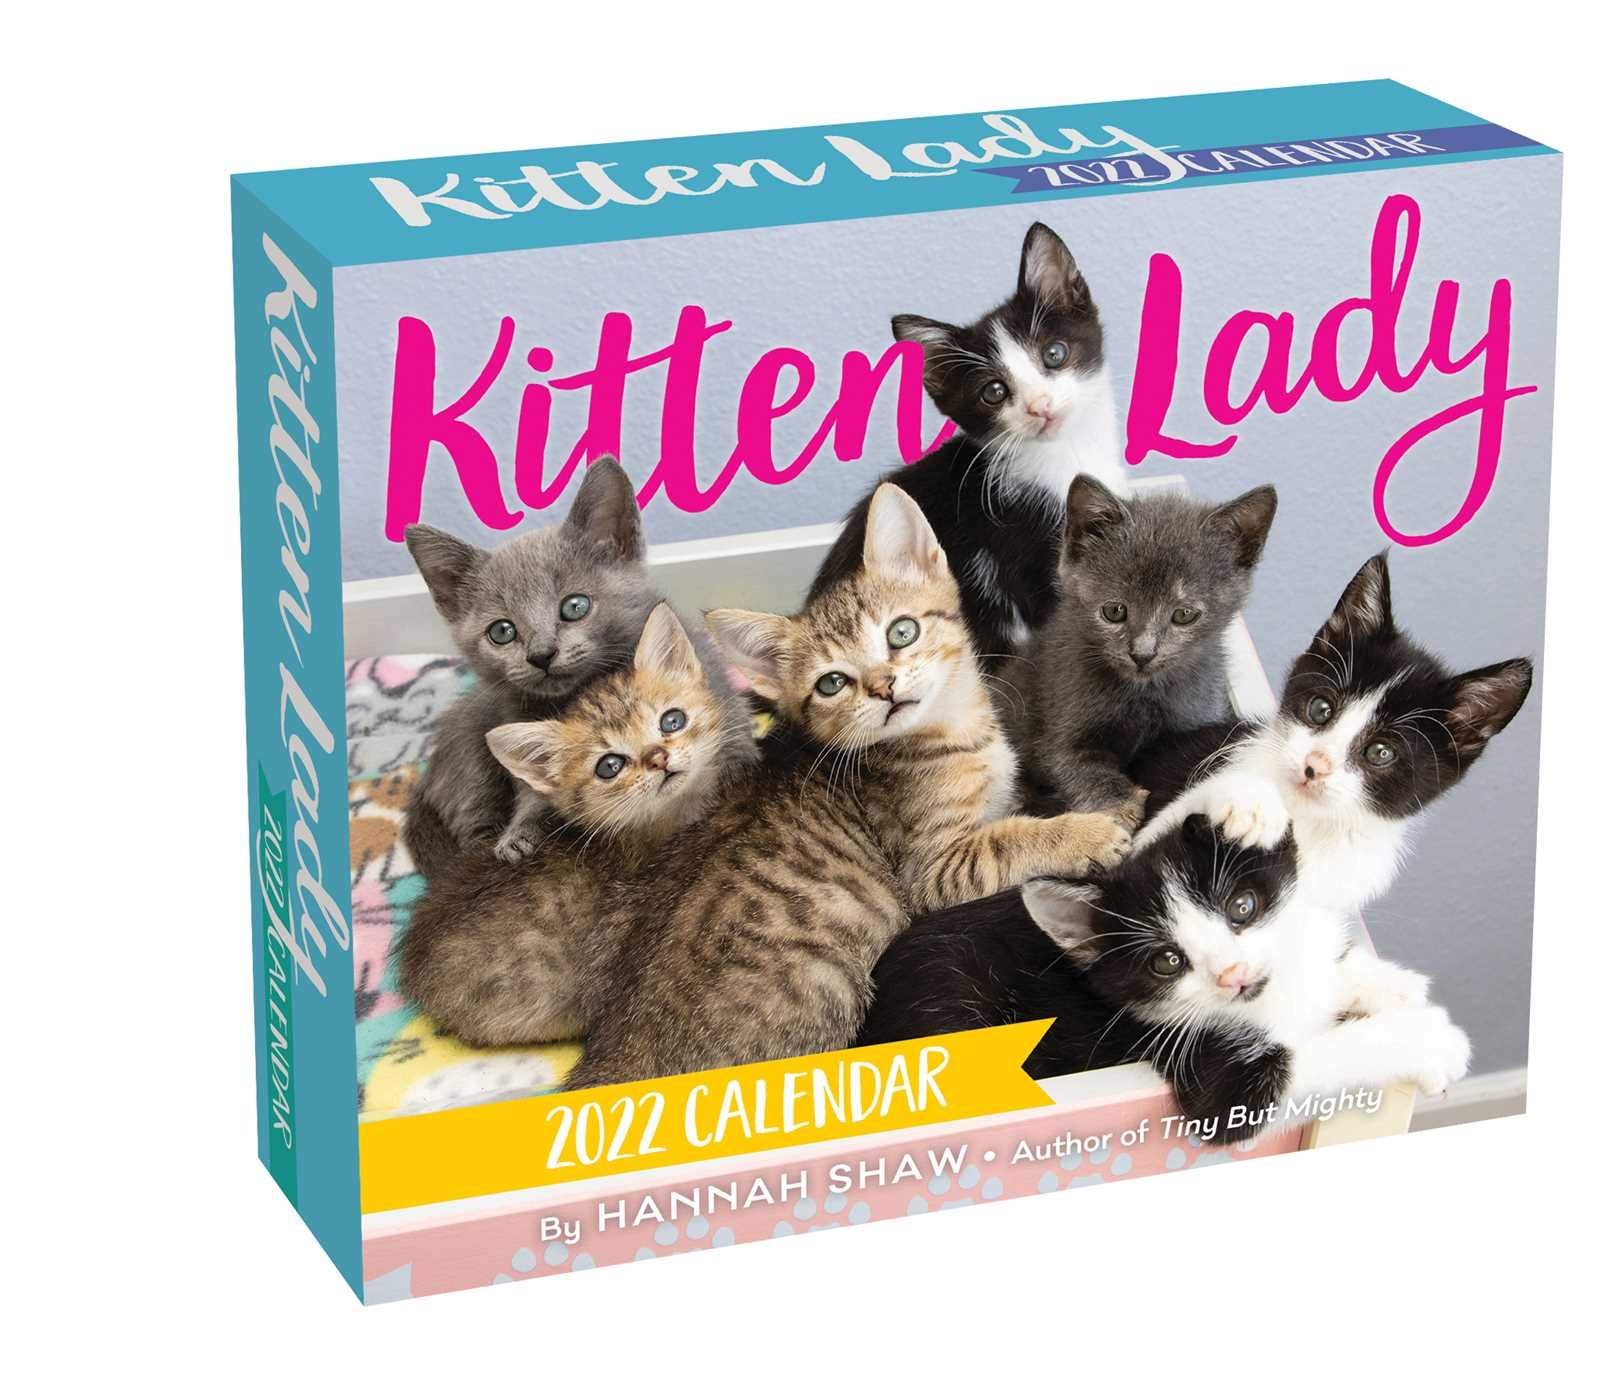 Features adorable photos along with care tips, stories about foster kittens, and practical ways that you can help orphan kittens. 